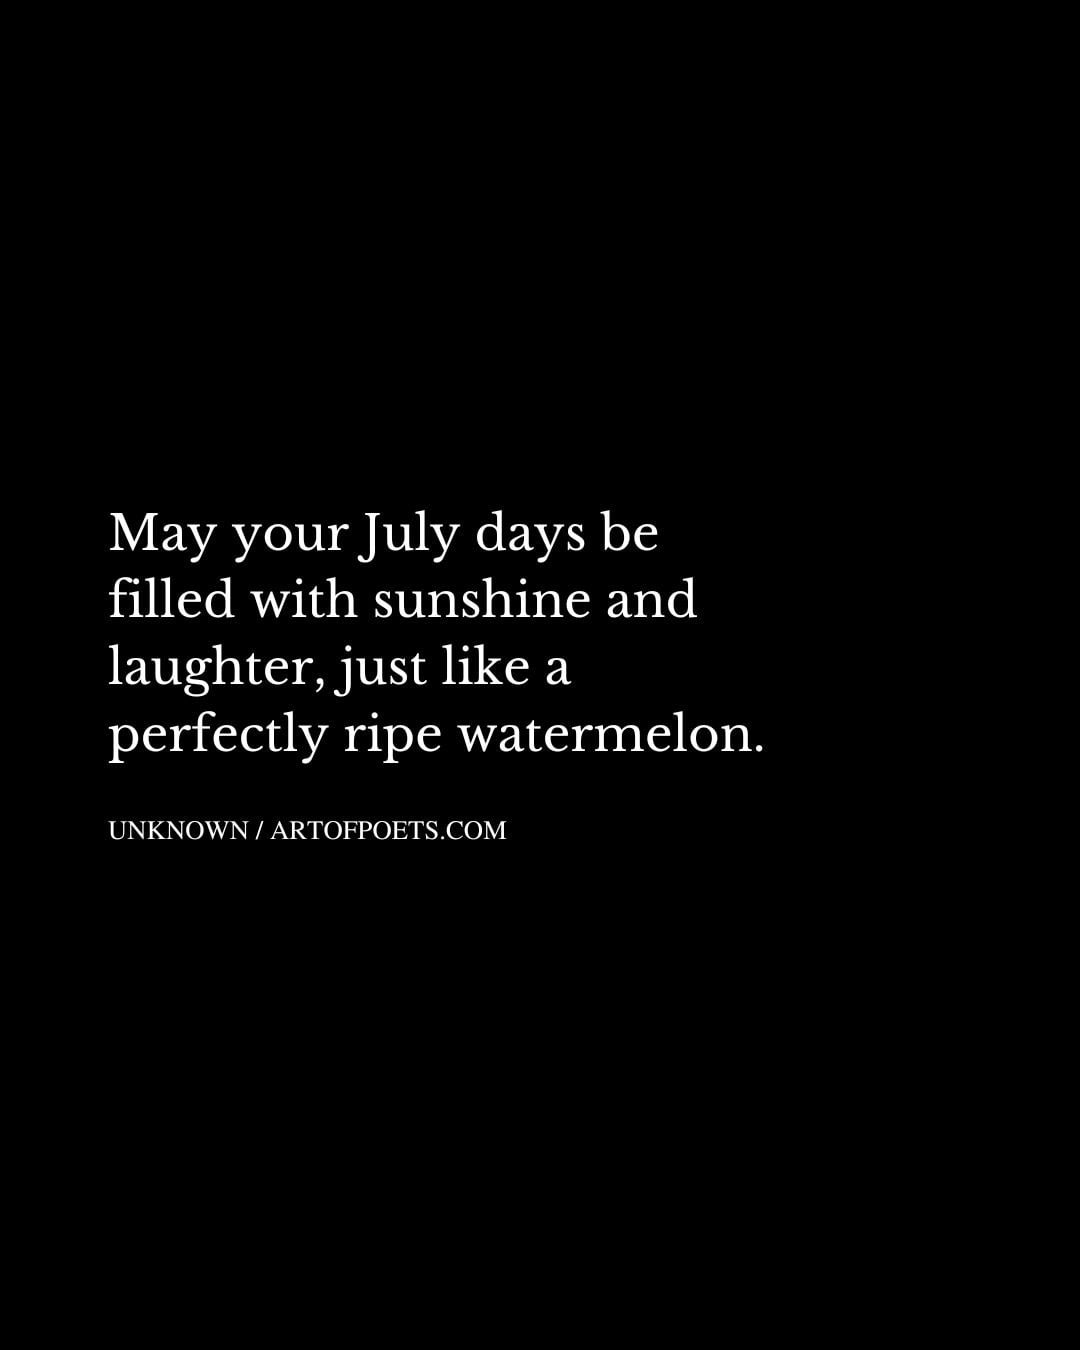 May your July days be filled with sunshine and laughter just like a perfectly ripe watermelon